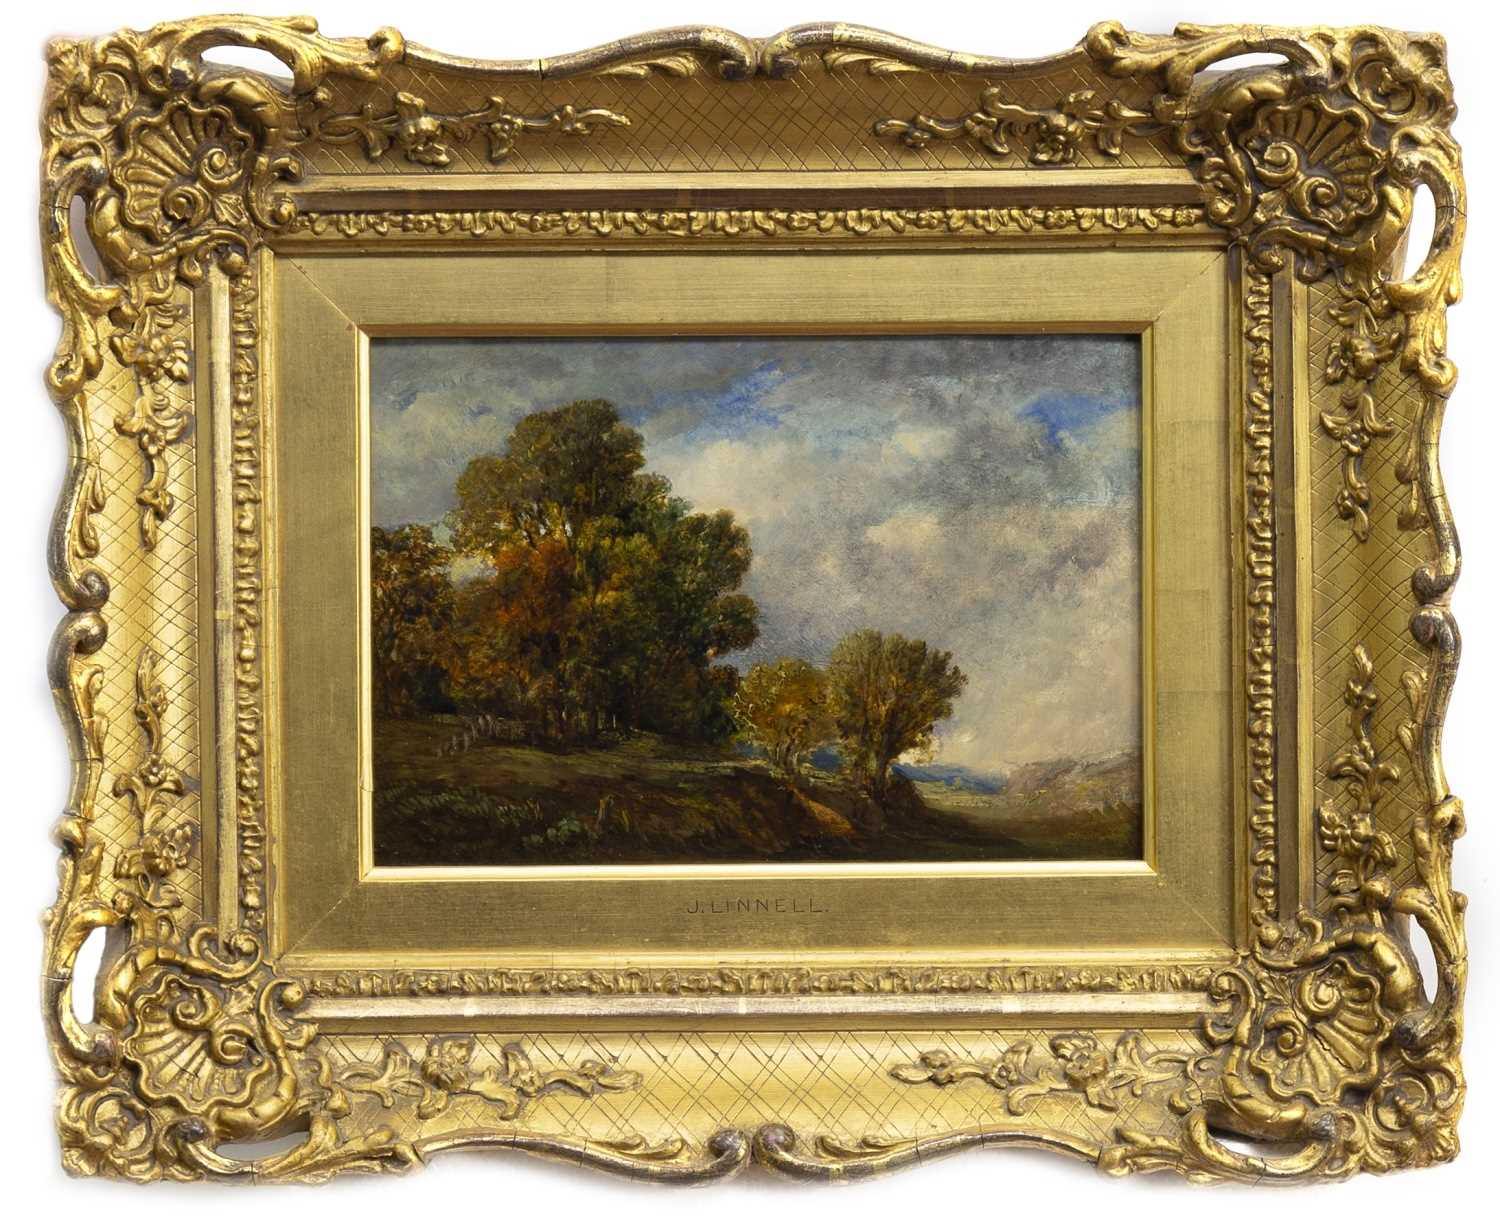 Lot 456 - LANDSCAPE WITH TREES, AN OIL BY JOHN LINNELL